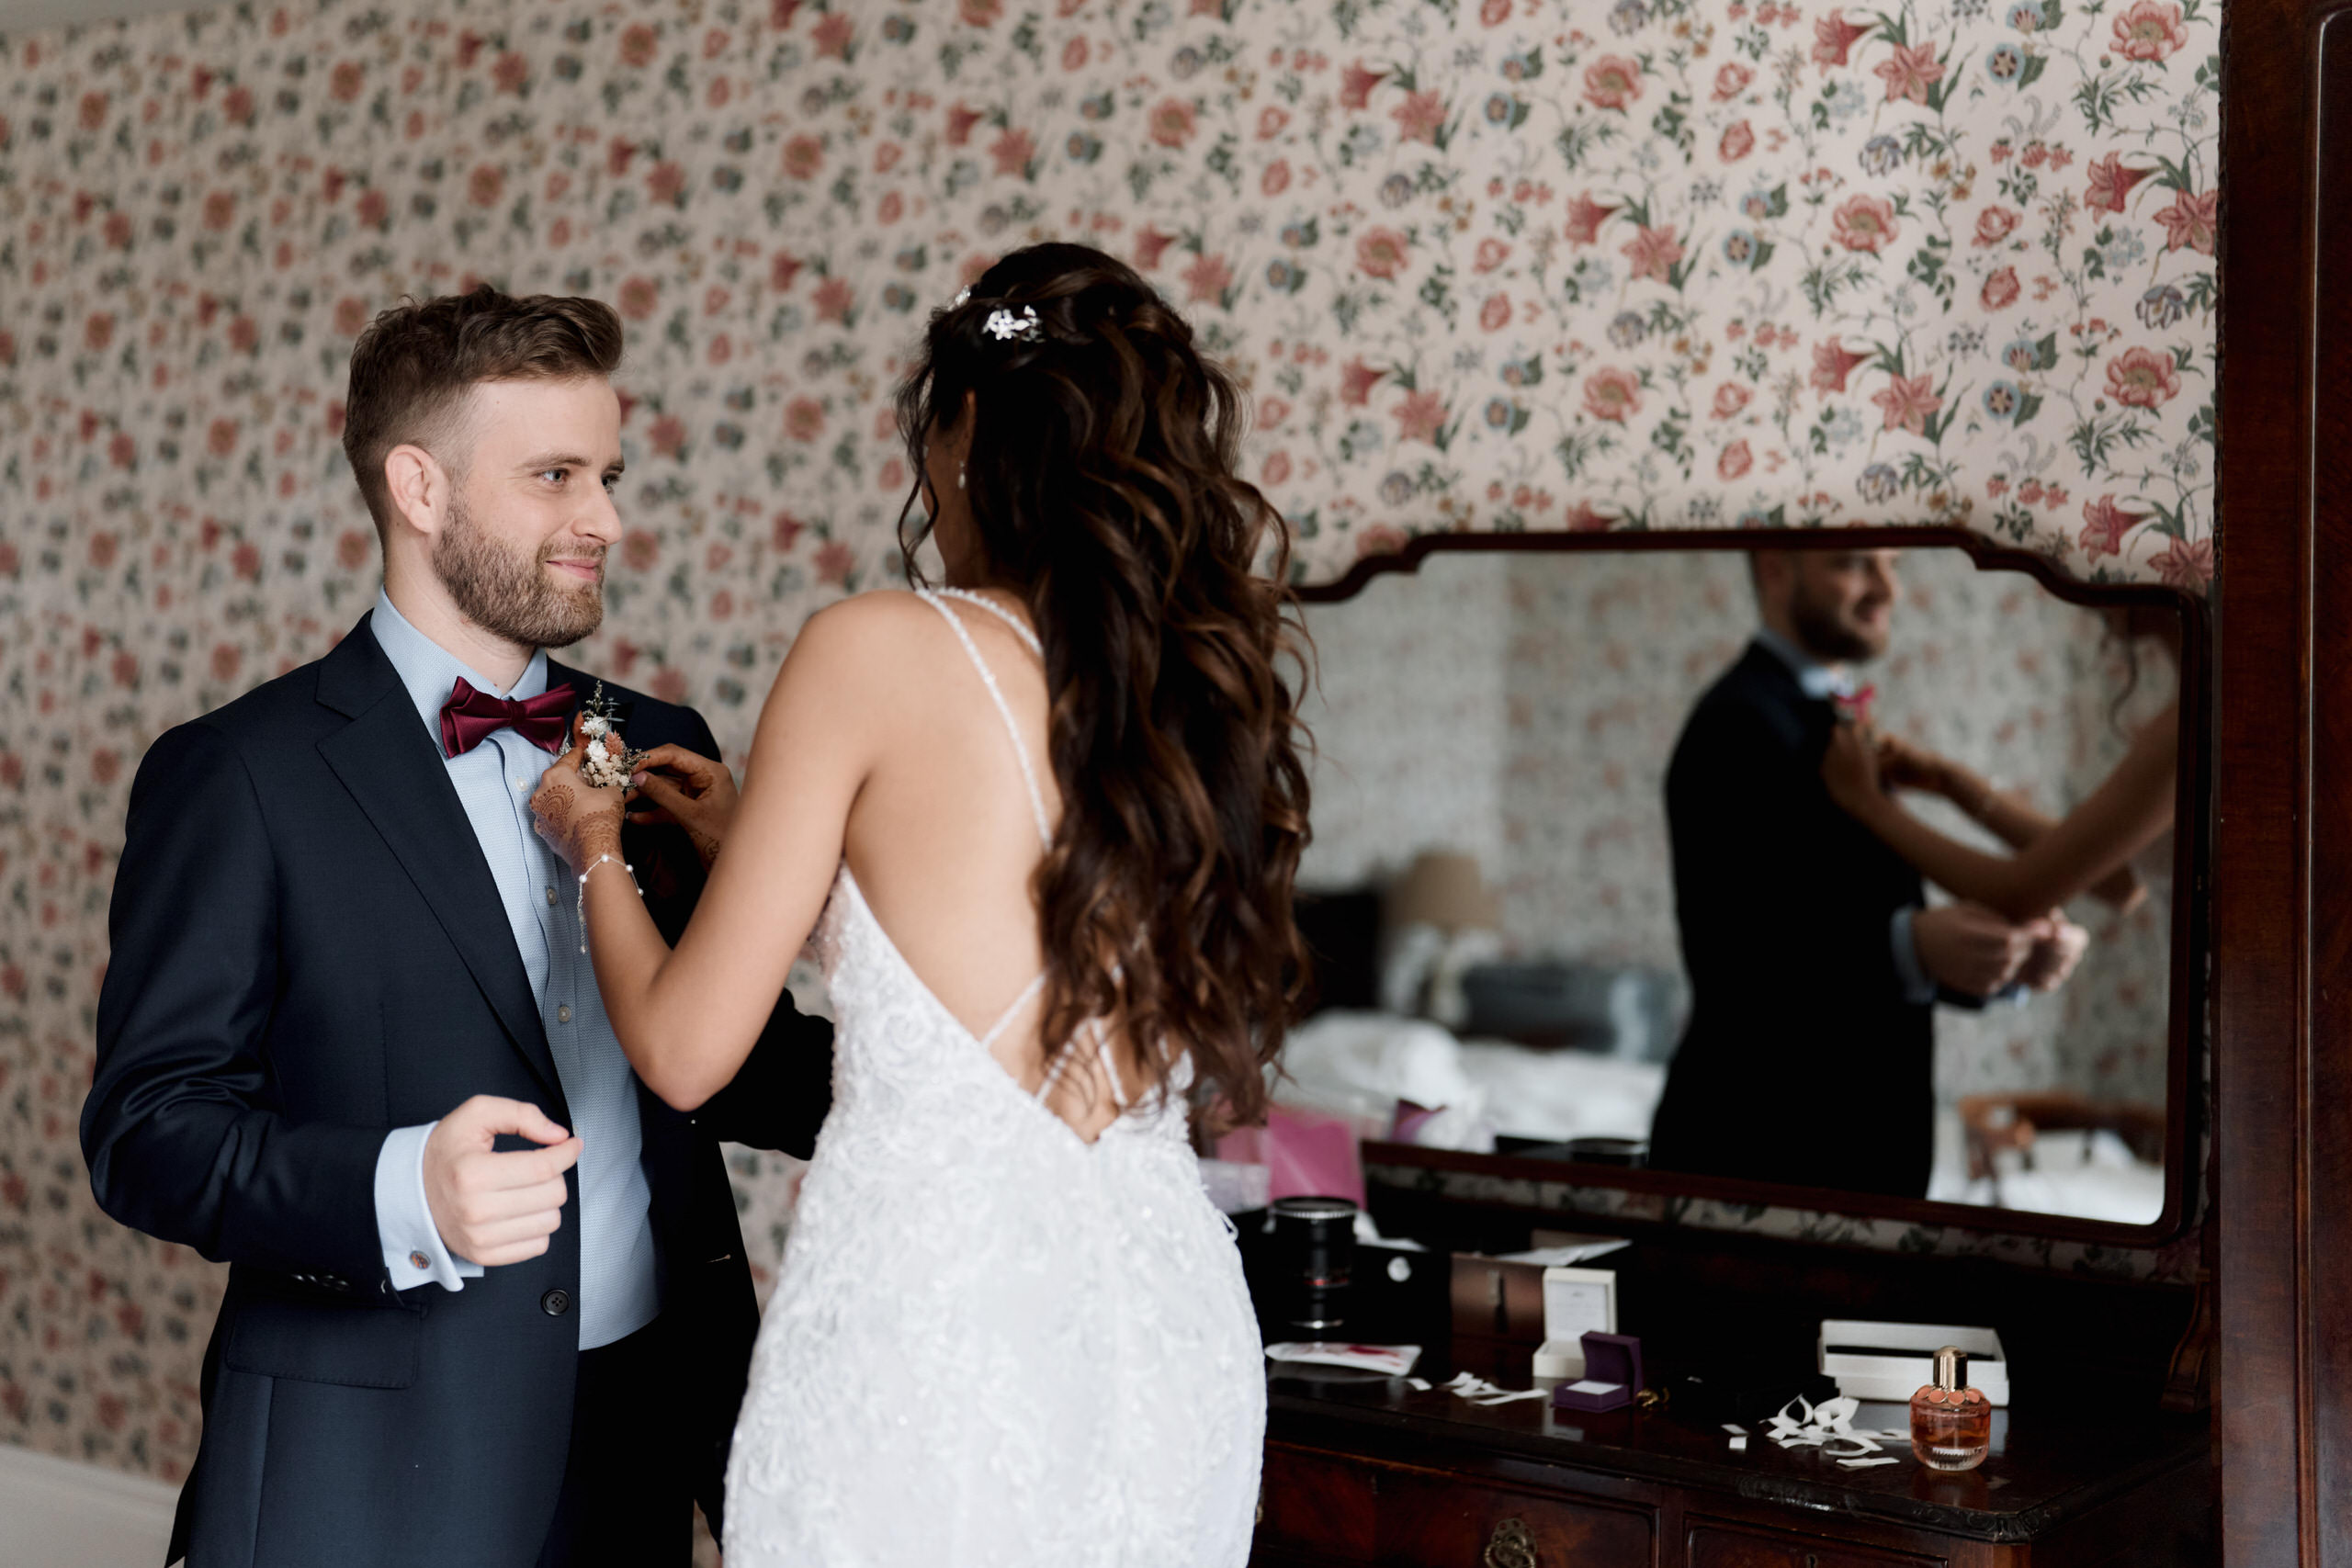 A bride and groom are preparing for their wedding.